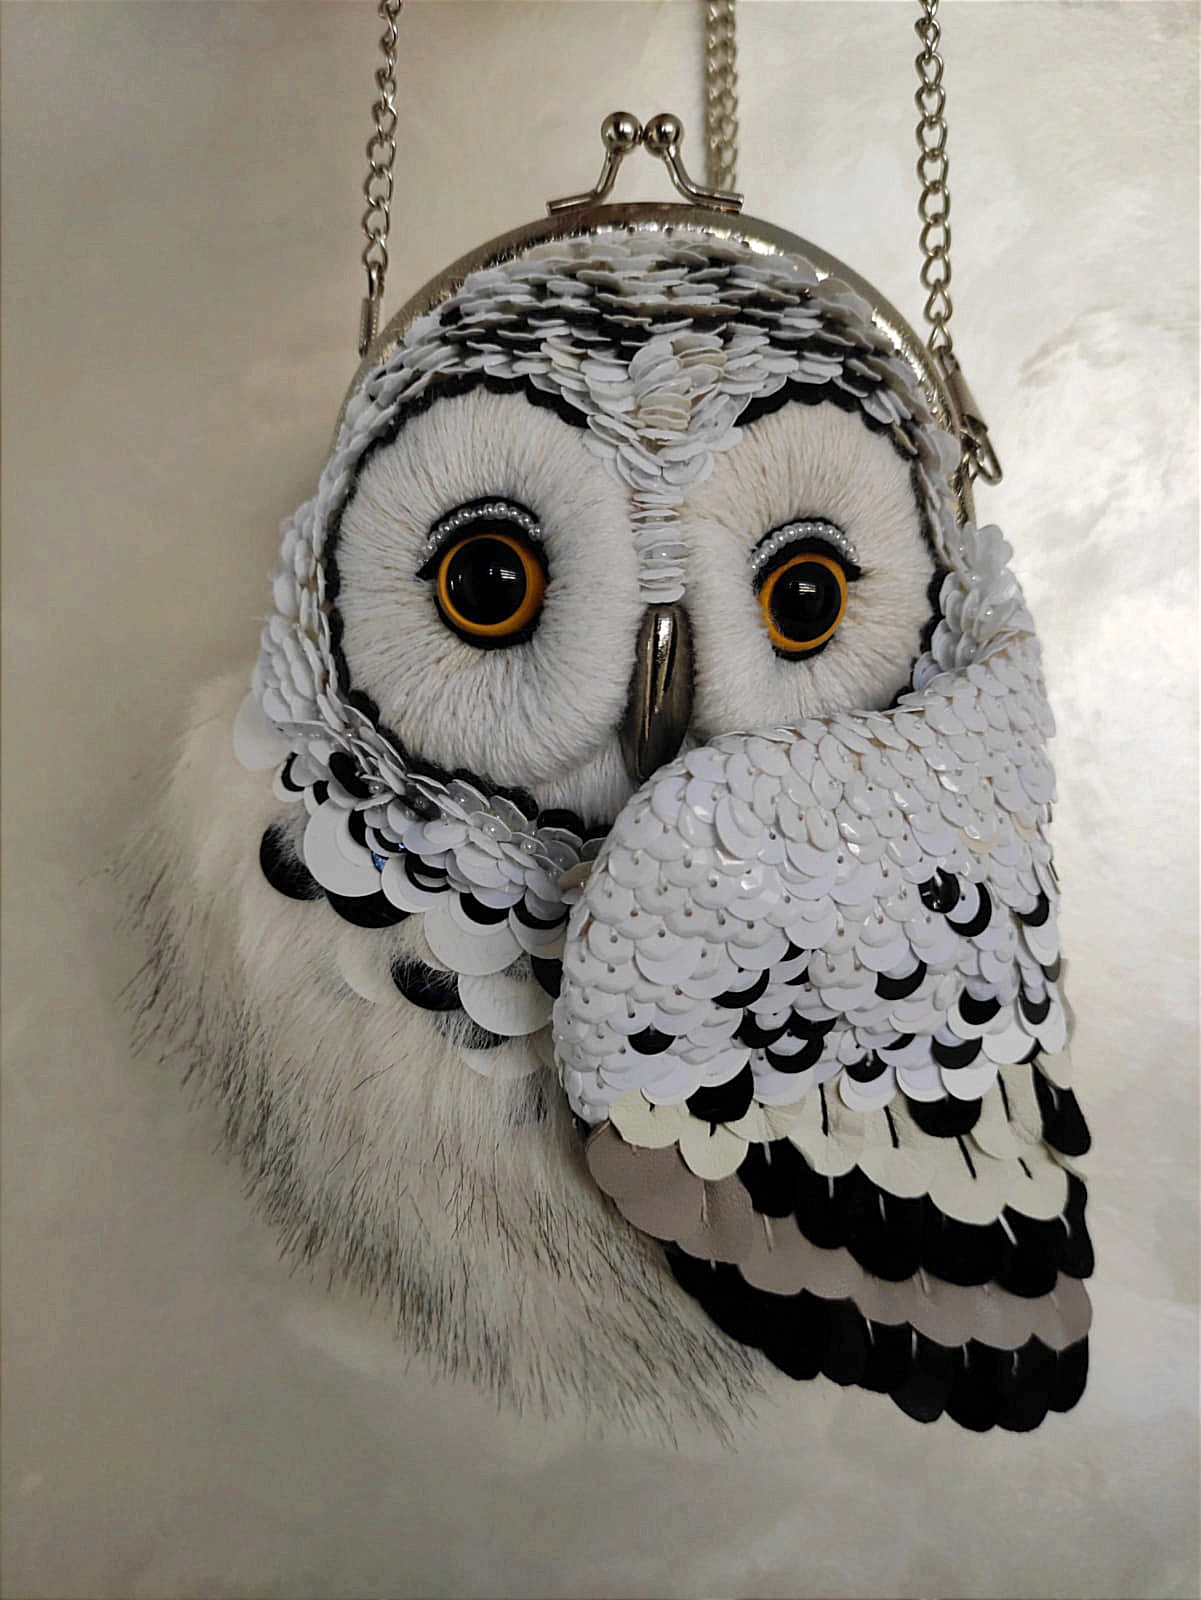 Intricate And Whimsical Hand Embroidered Felted Bags By Alena Kova (22)